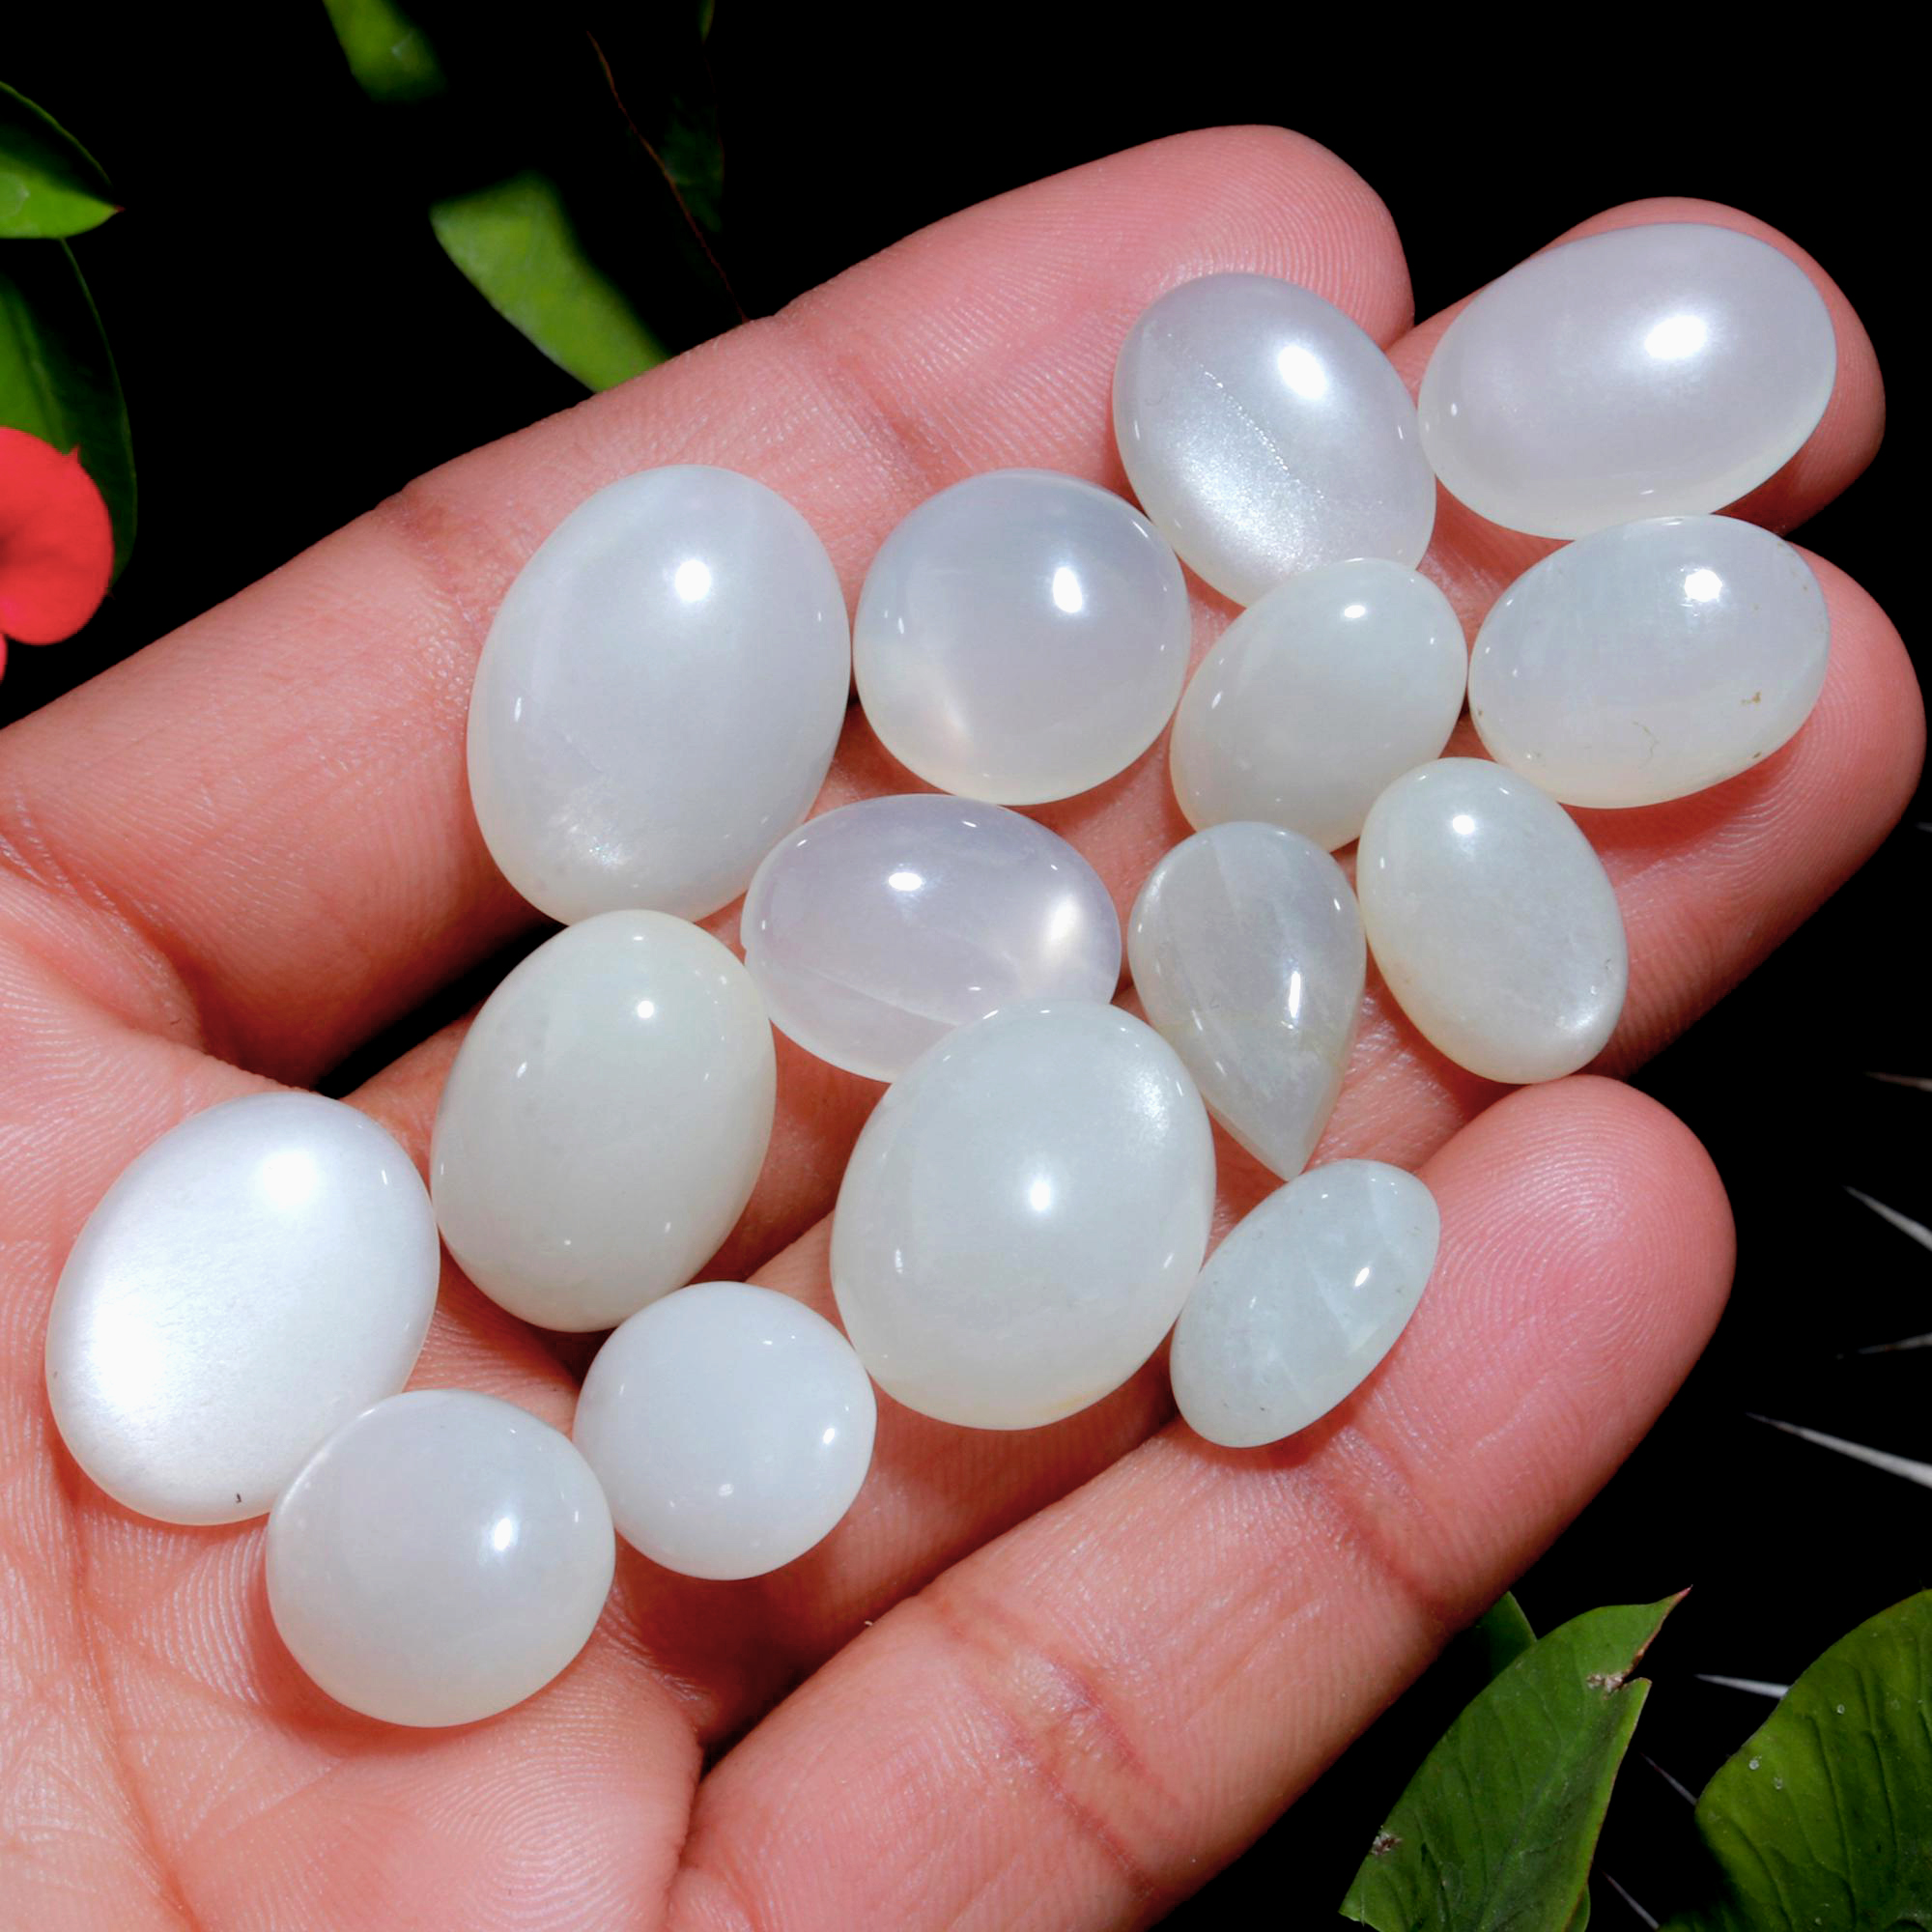 15 Pcs. 127Cts. Natural White Rainbow Moonstone polished Mix Cabochon Wholesale Loose Lot Size 20x15 14x10mm Gemstone for jewelry#1142